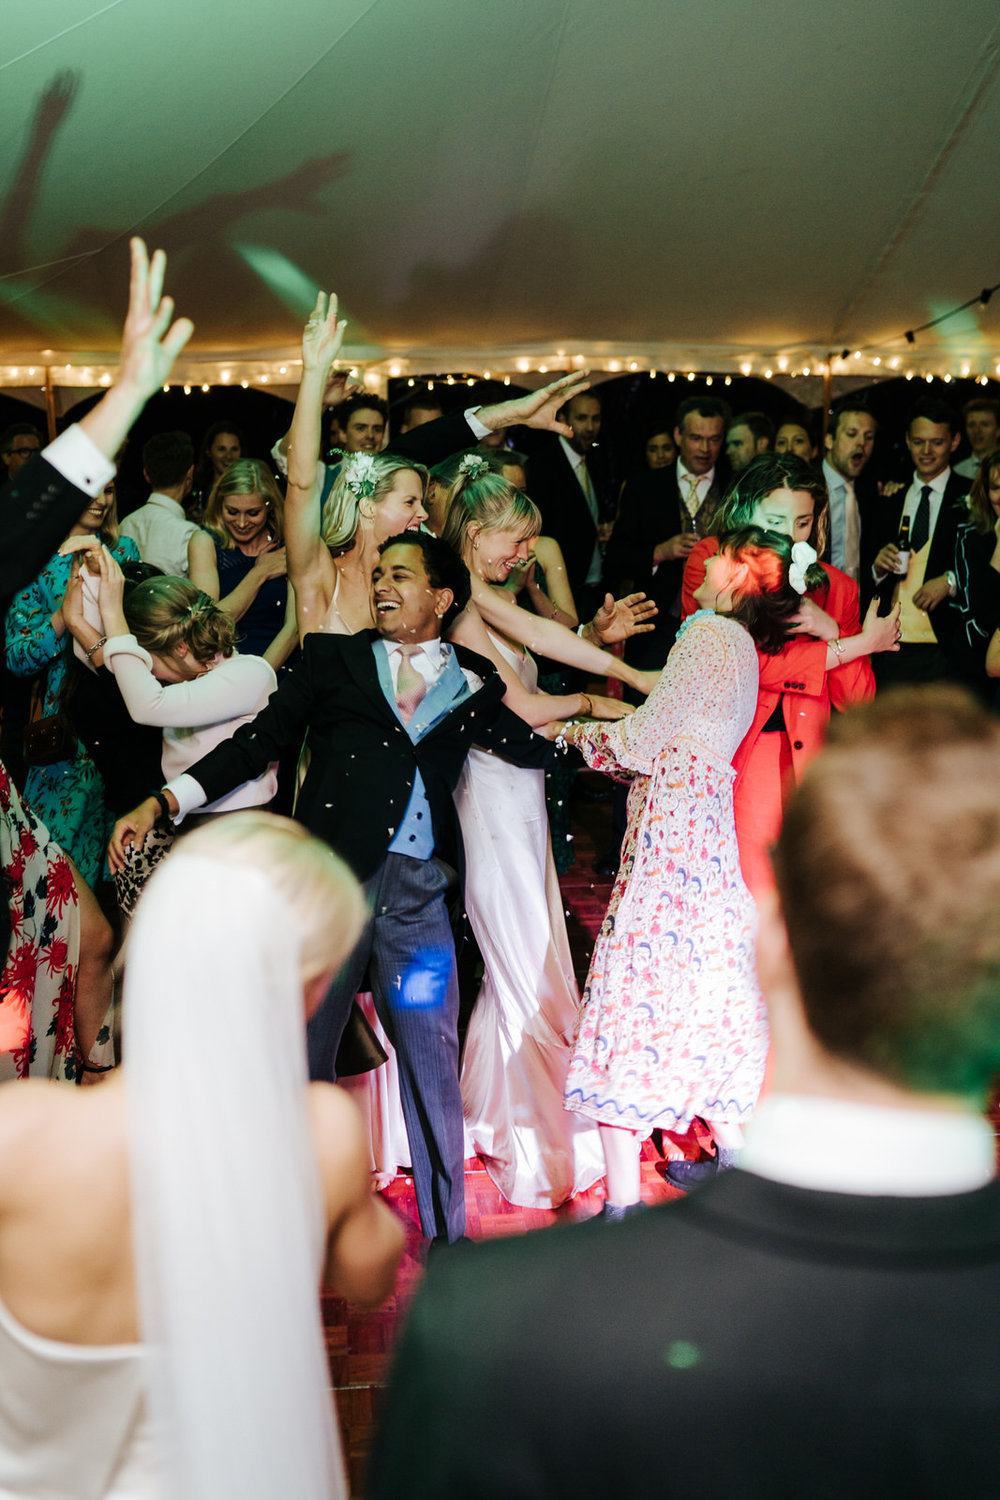  Chaos on the dancefloor as a lot of guests try to catch the bouquet at once 